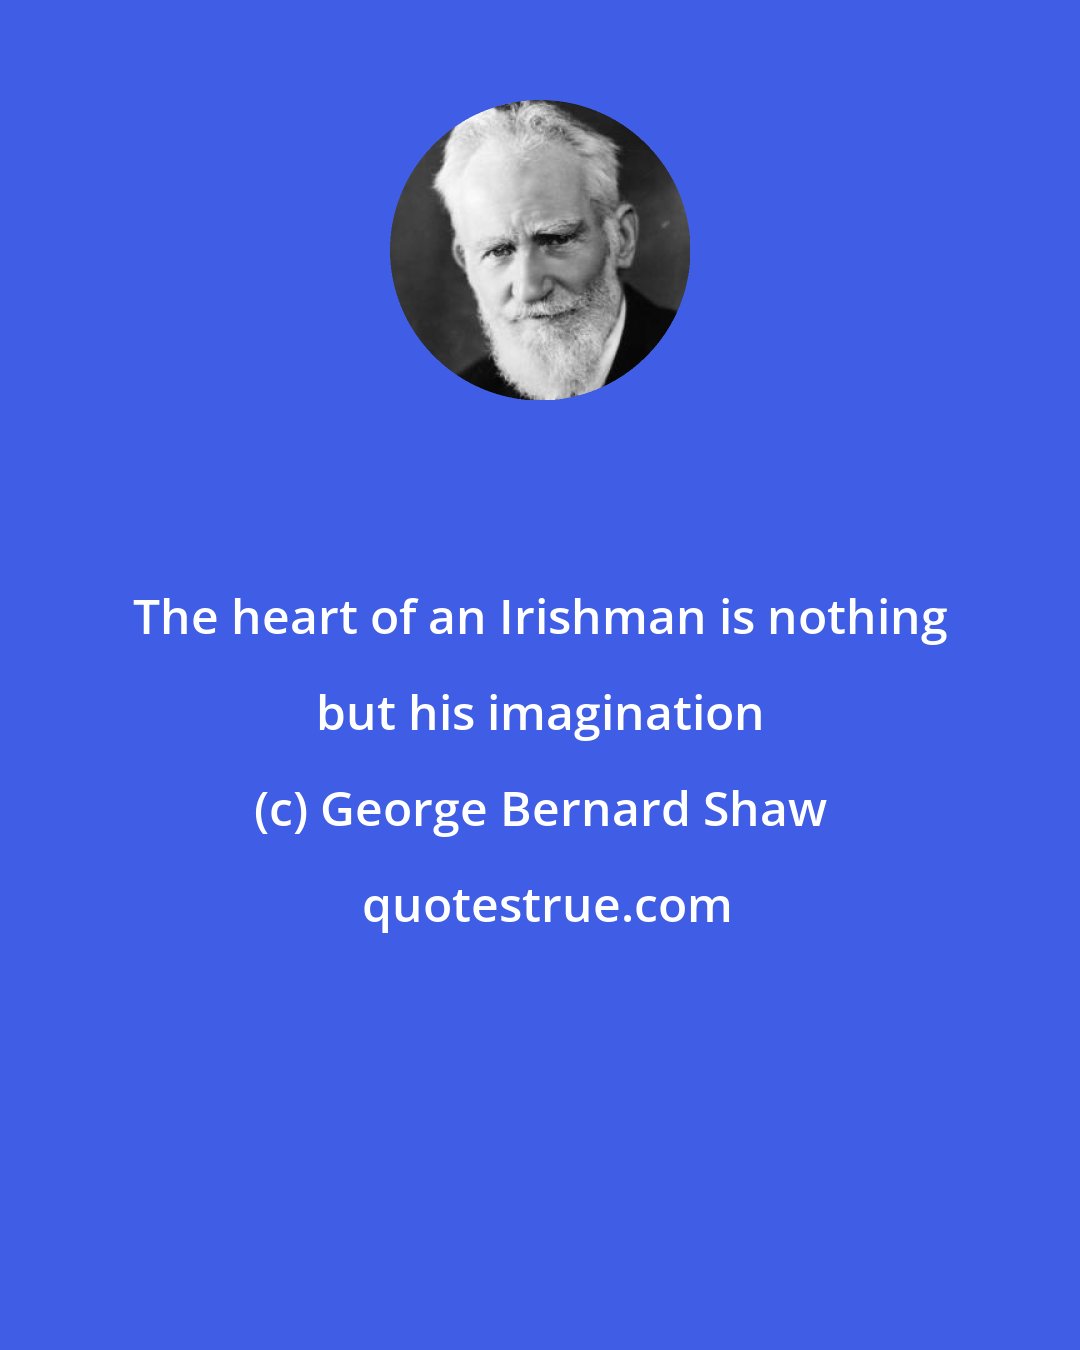 George Bernard Shaw: The heart of an Irishman is nothing but his imagination